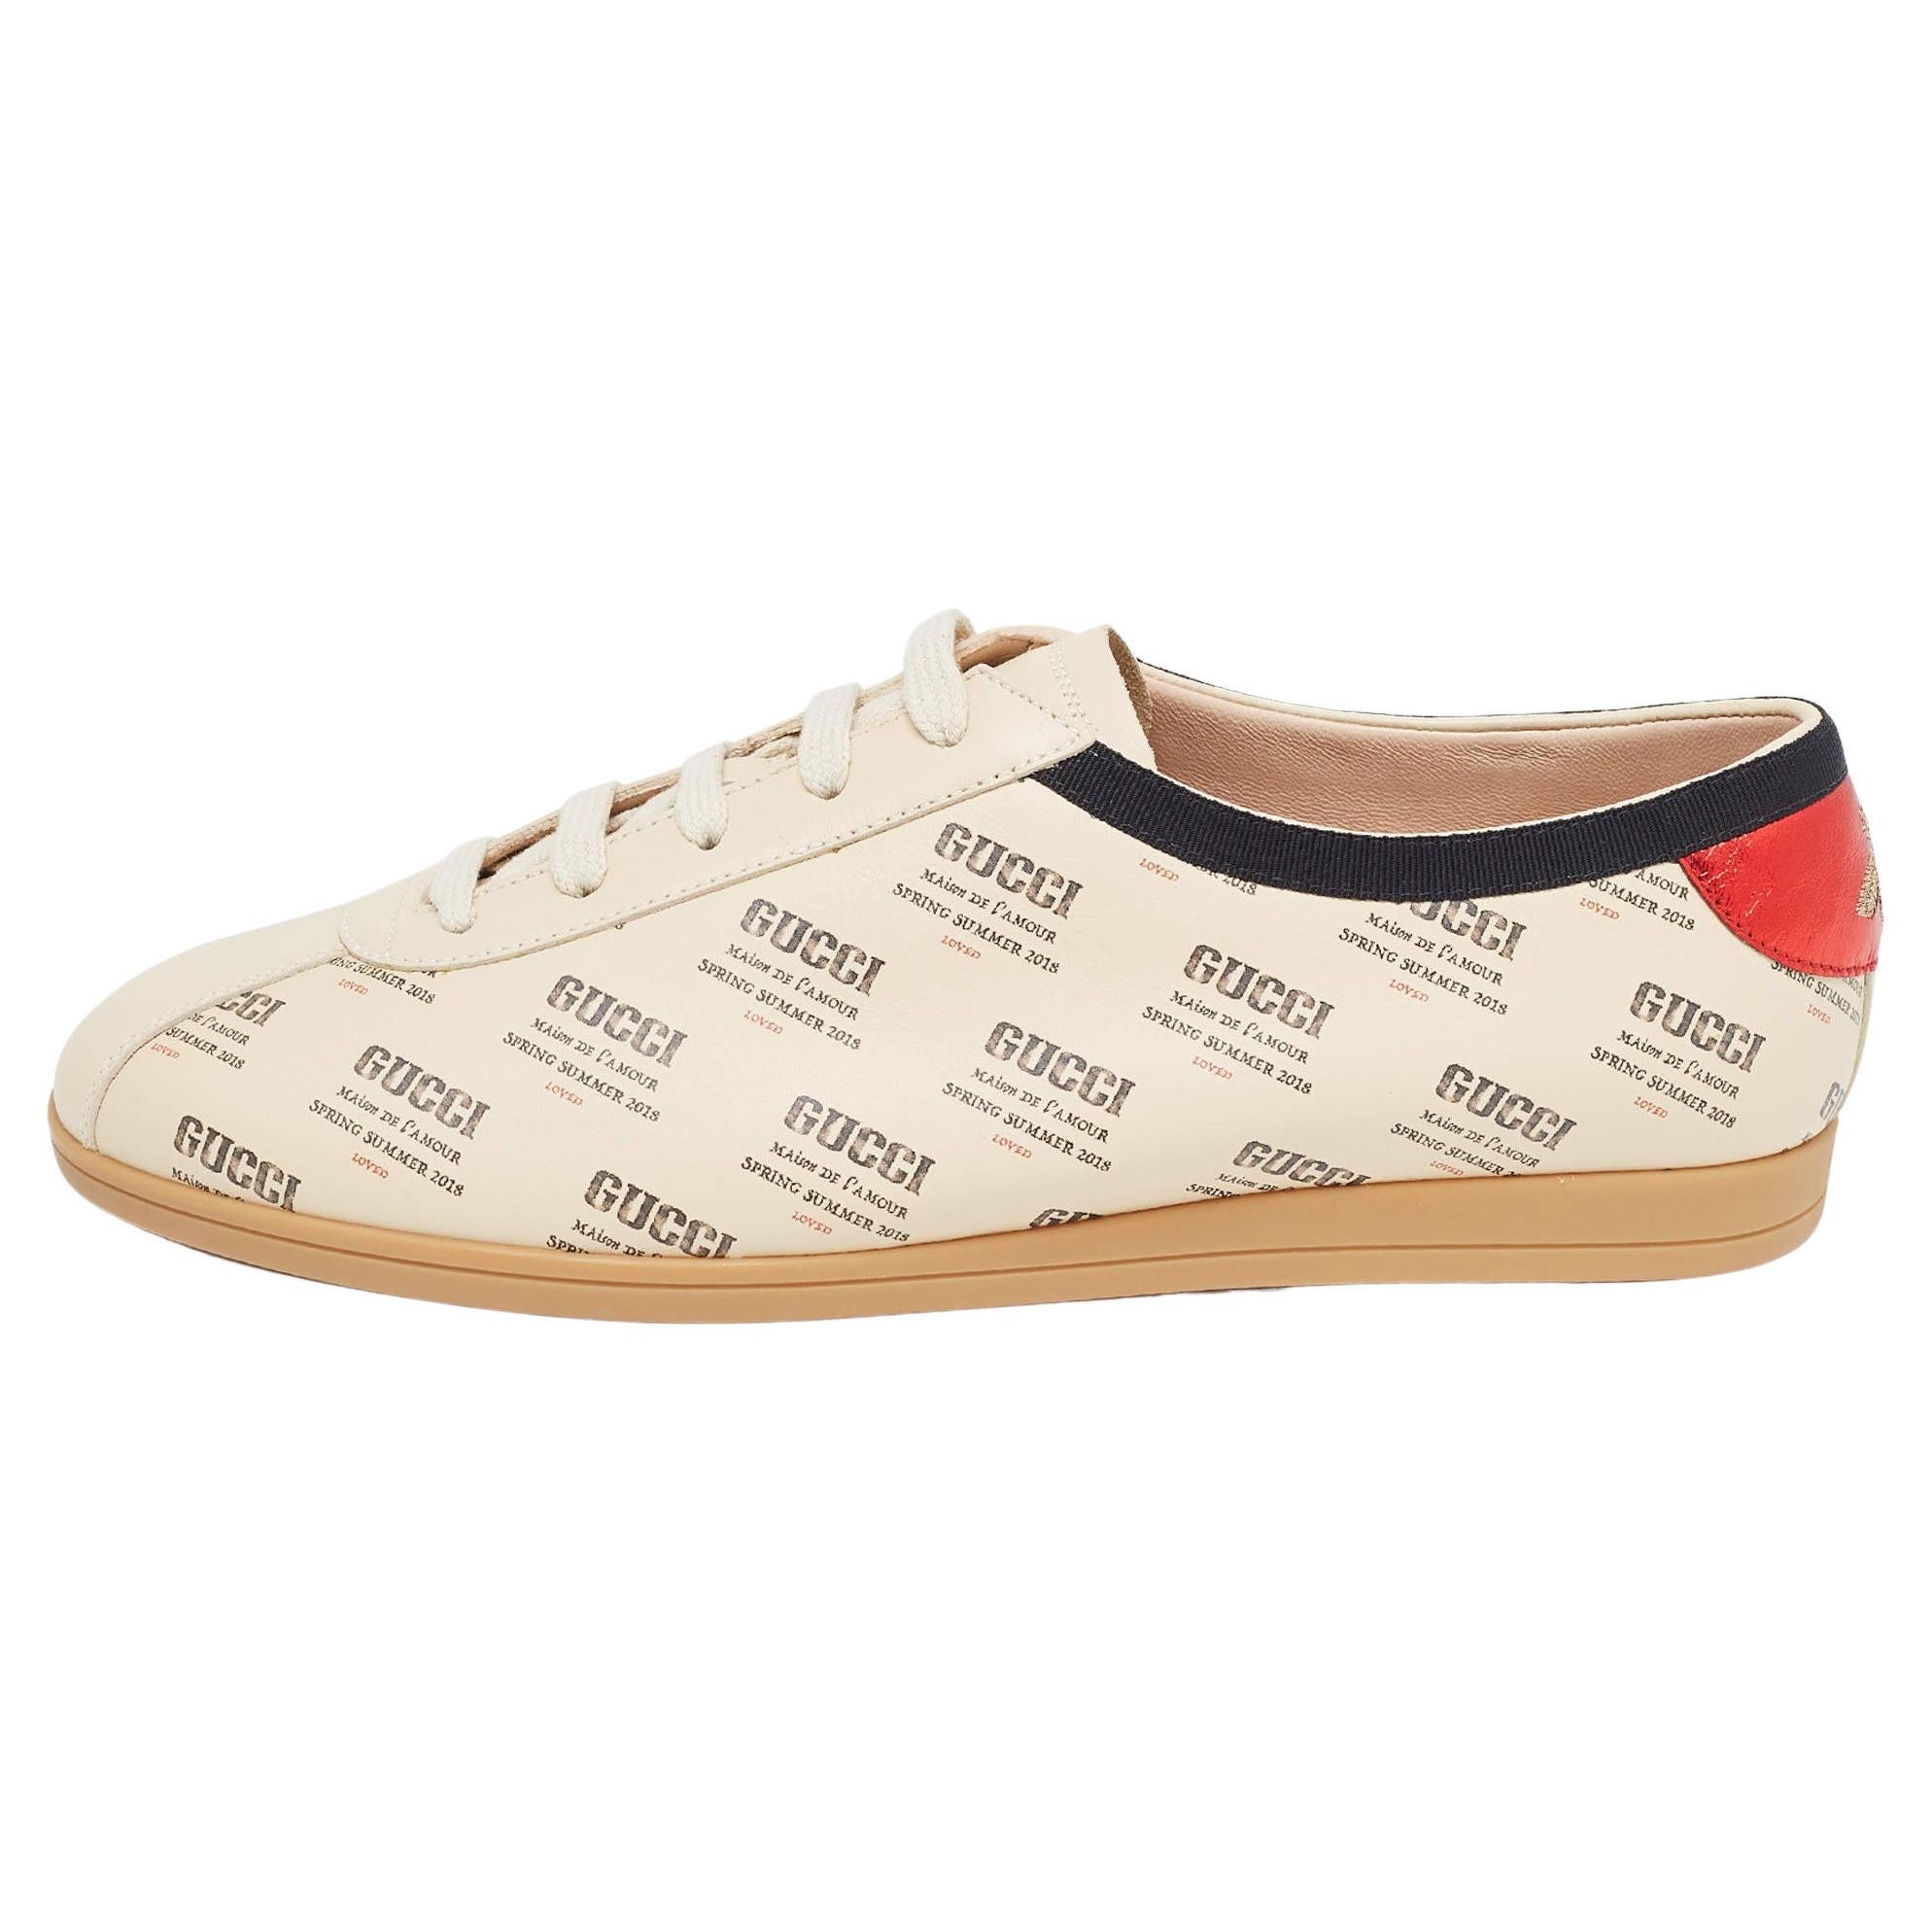 Gucci Beige Invite Print Leather Falacer Sneakers Size 40 For Sale